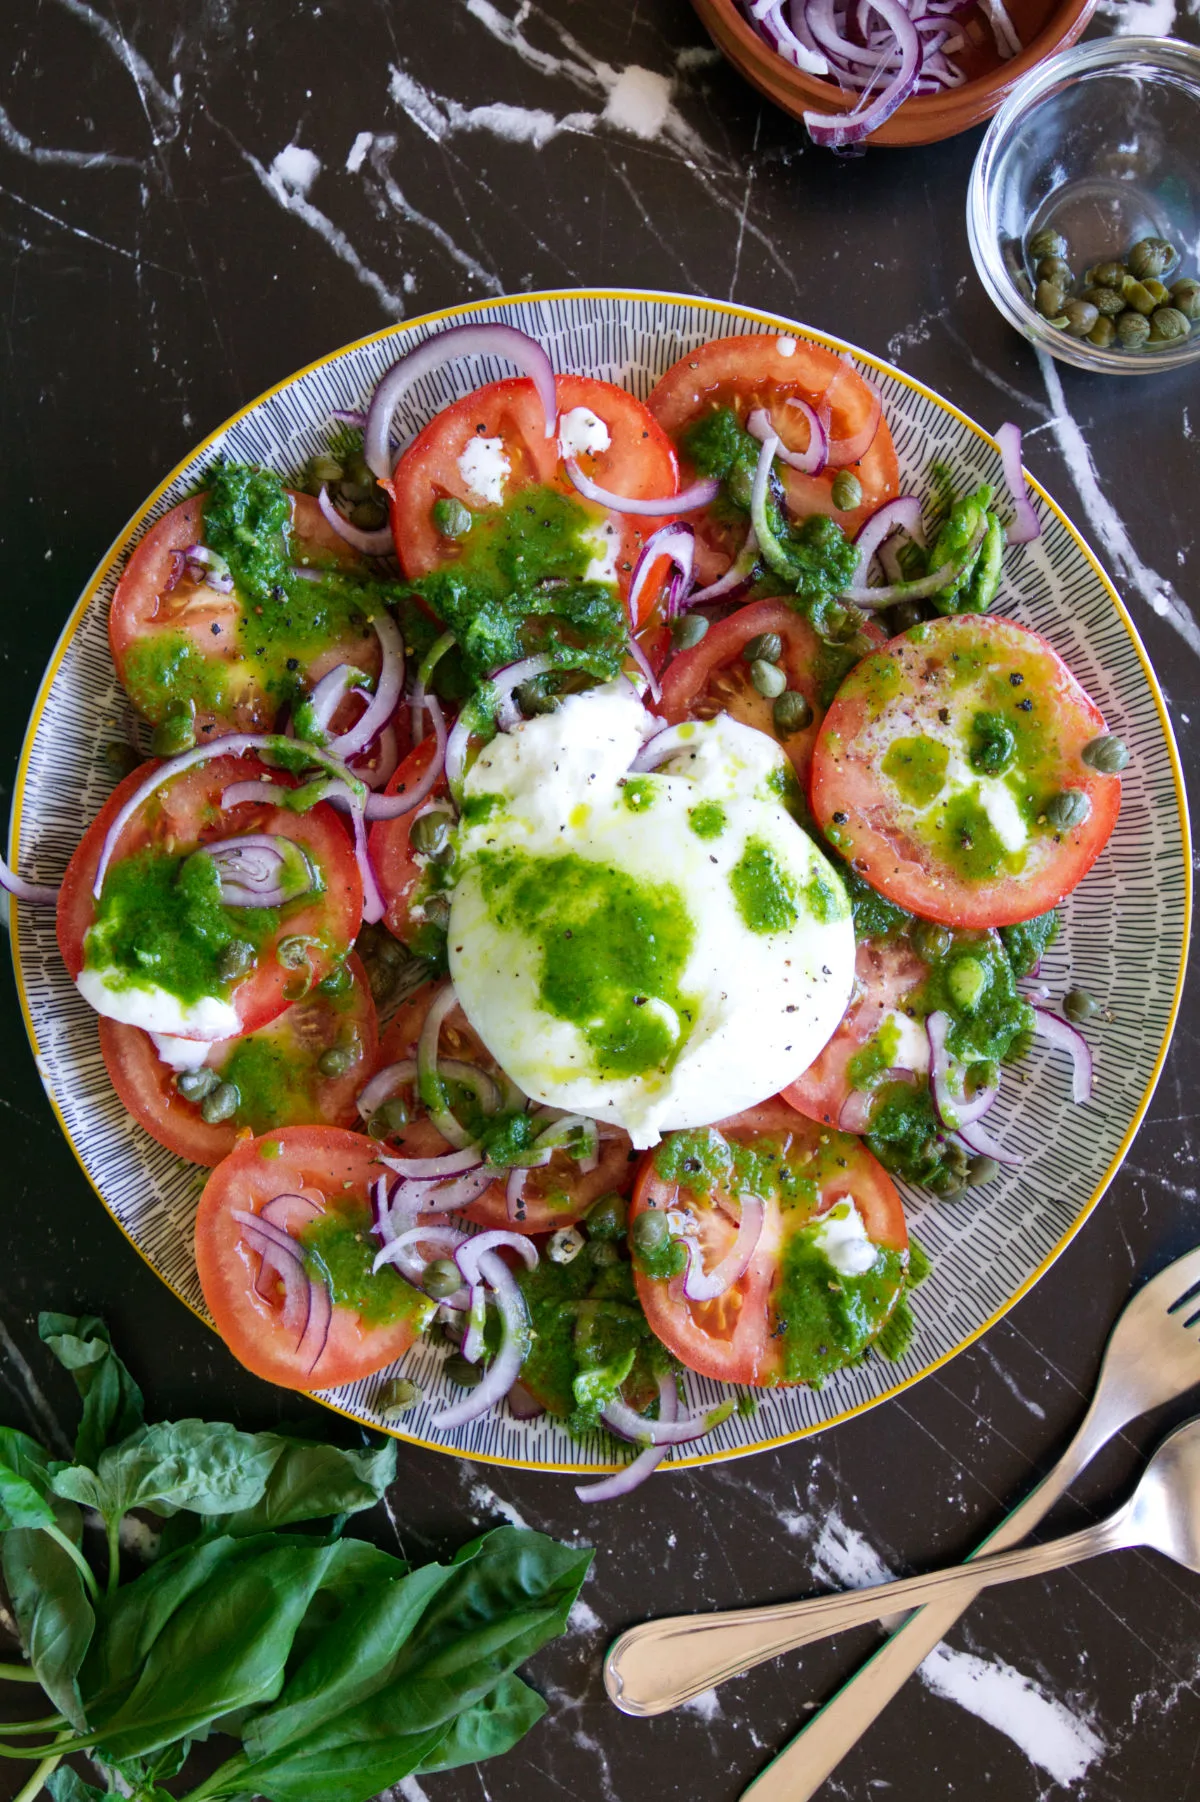 A plate of tomato burrata salad drizzled with a green basil and garlic dressing.